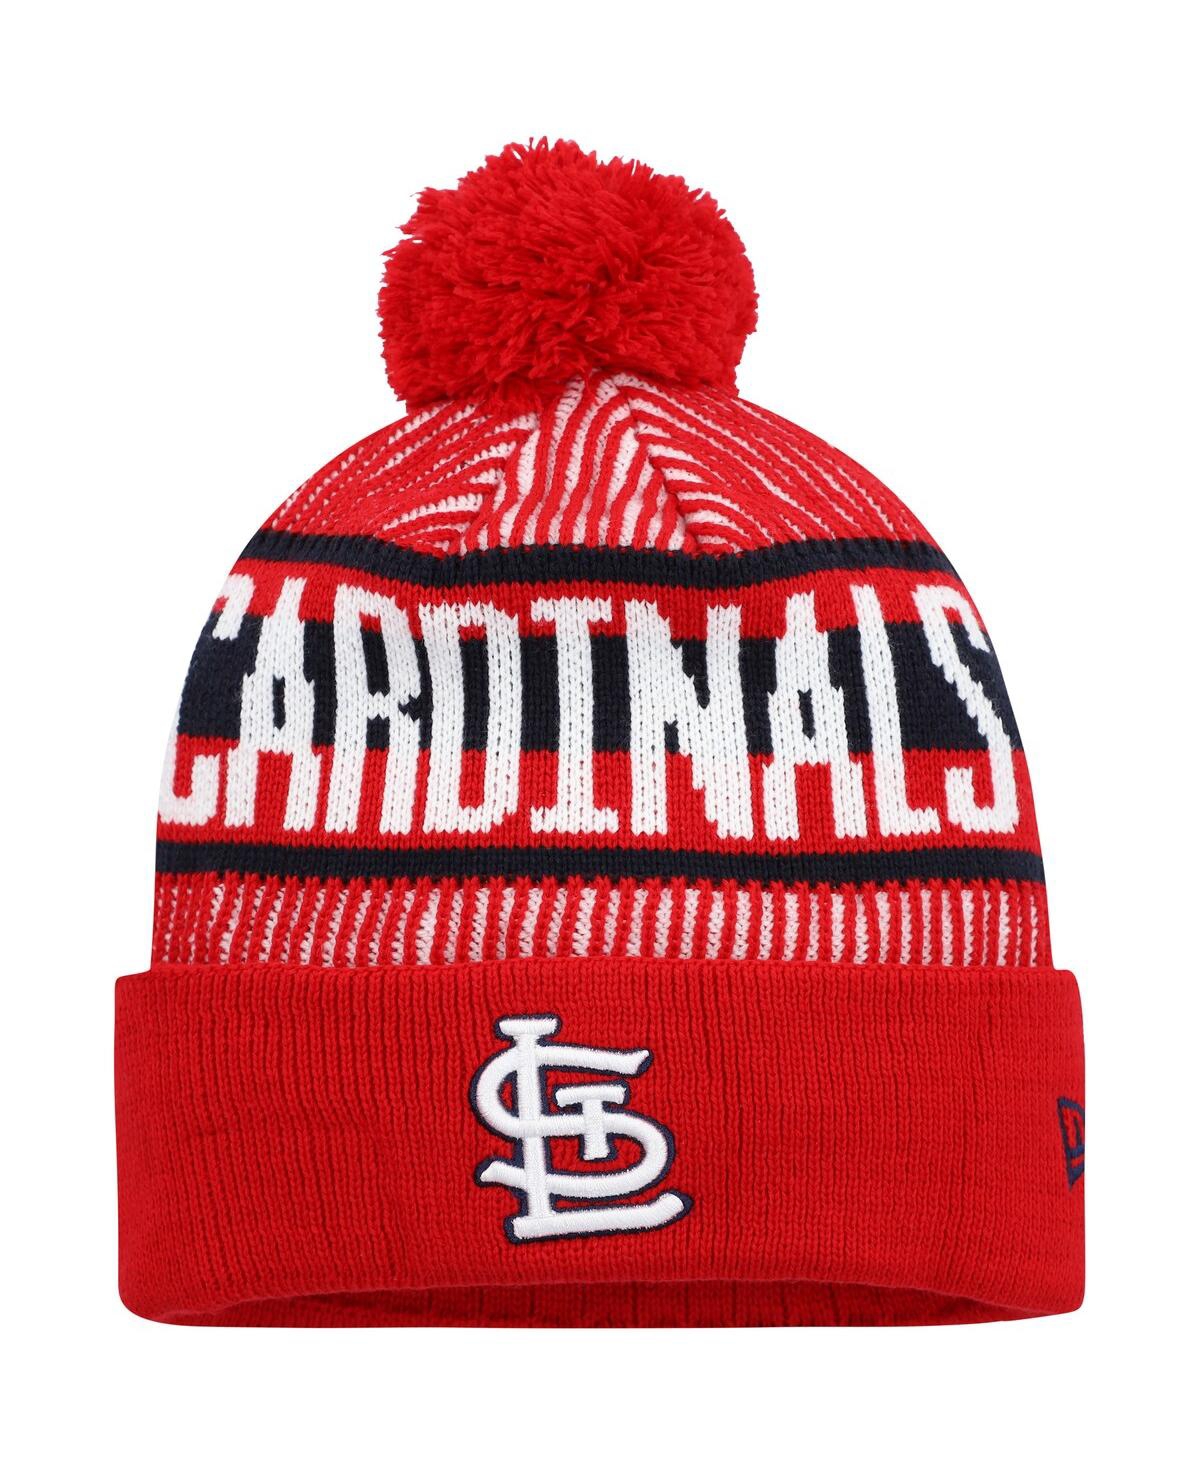 Fanatics Men's  Red St. Louis Cardinals Striped Cuffed Knit Hat With Pom